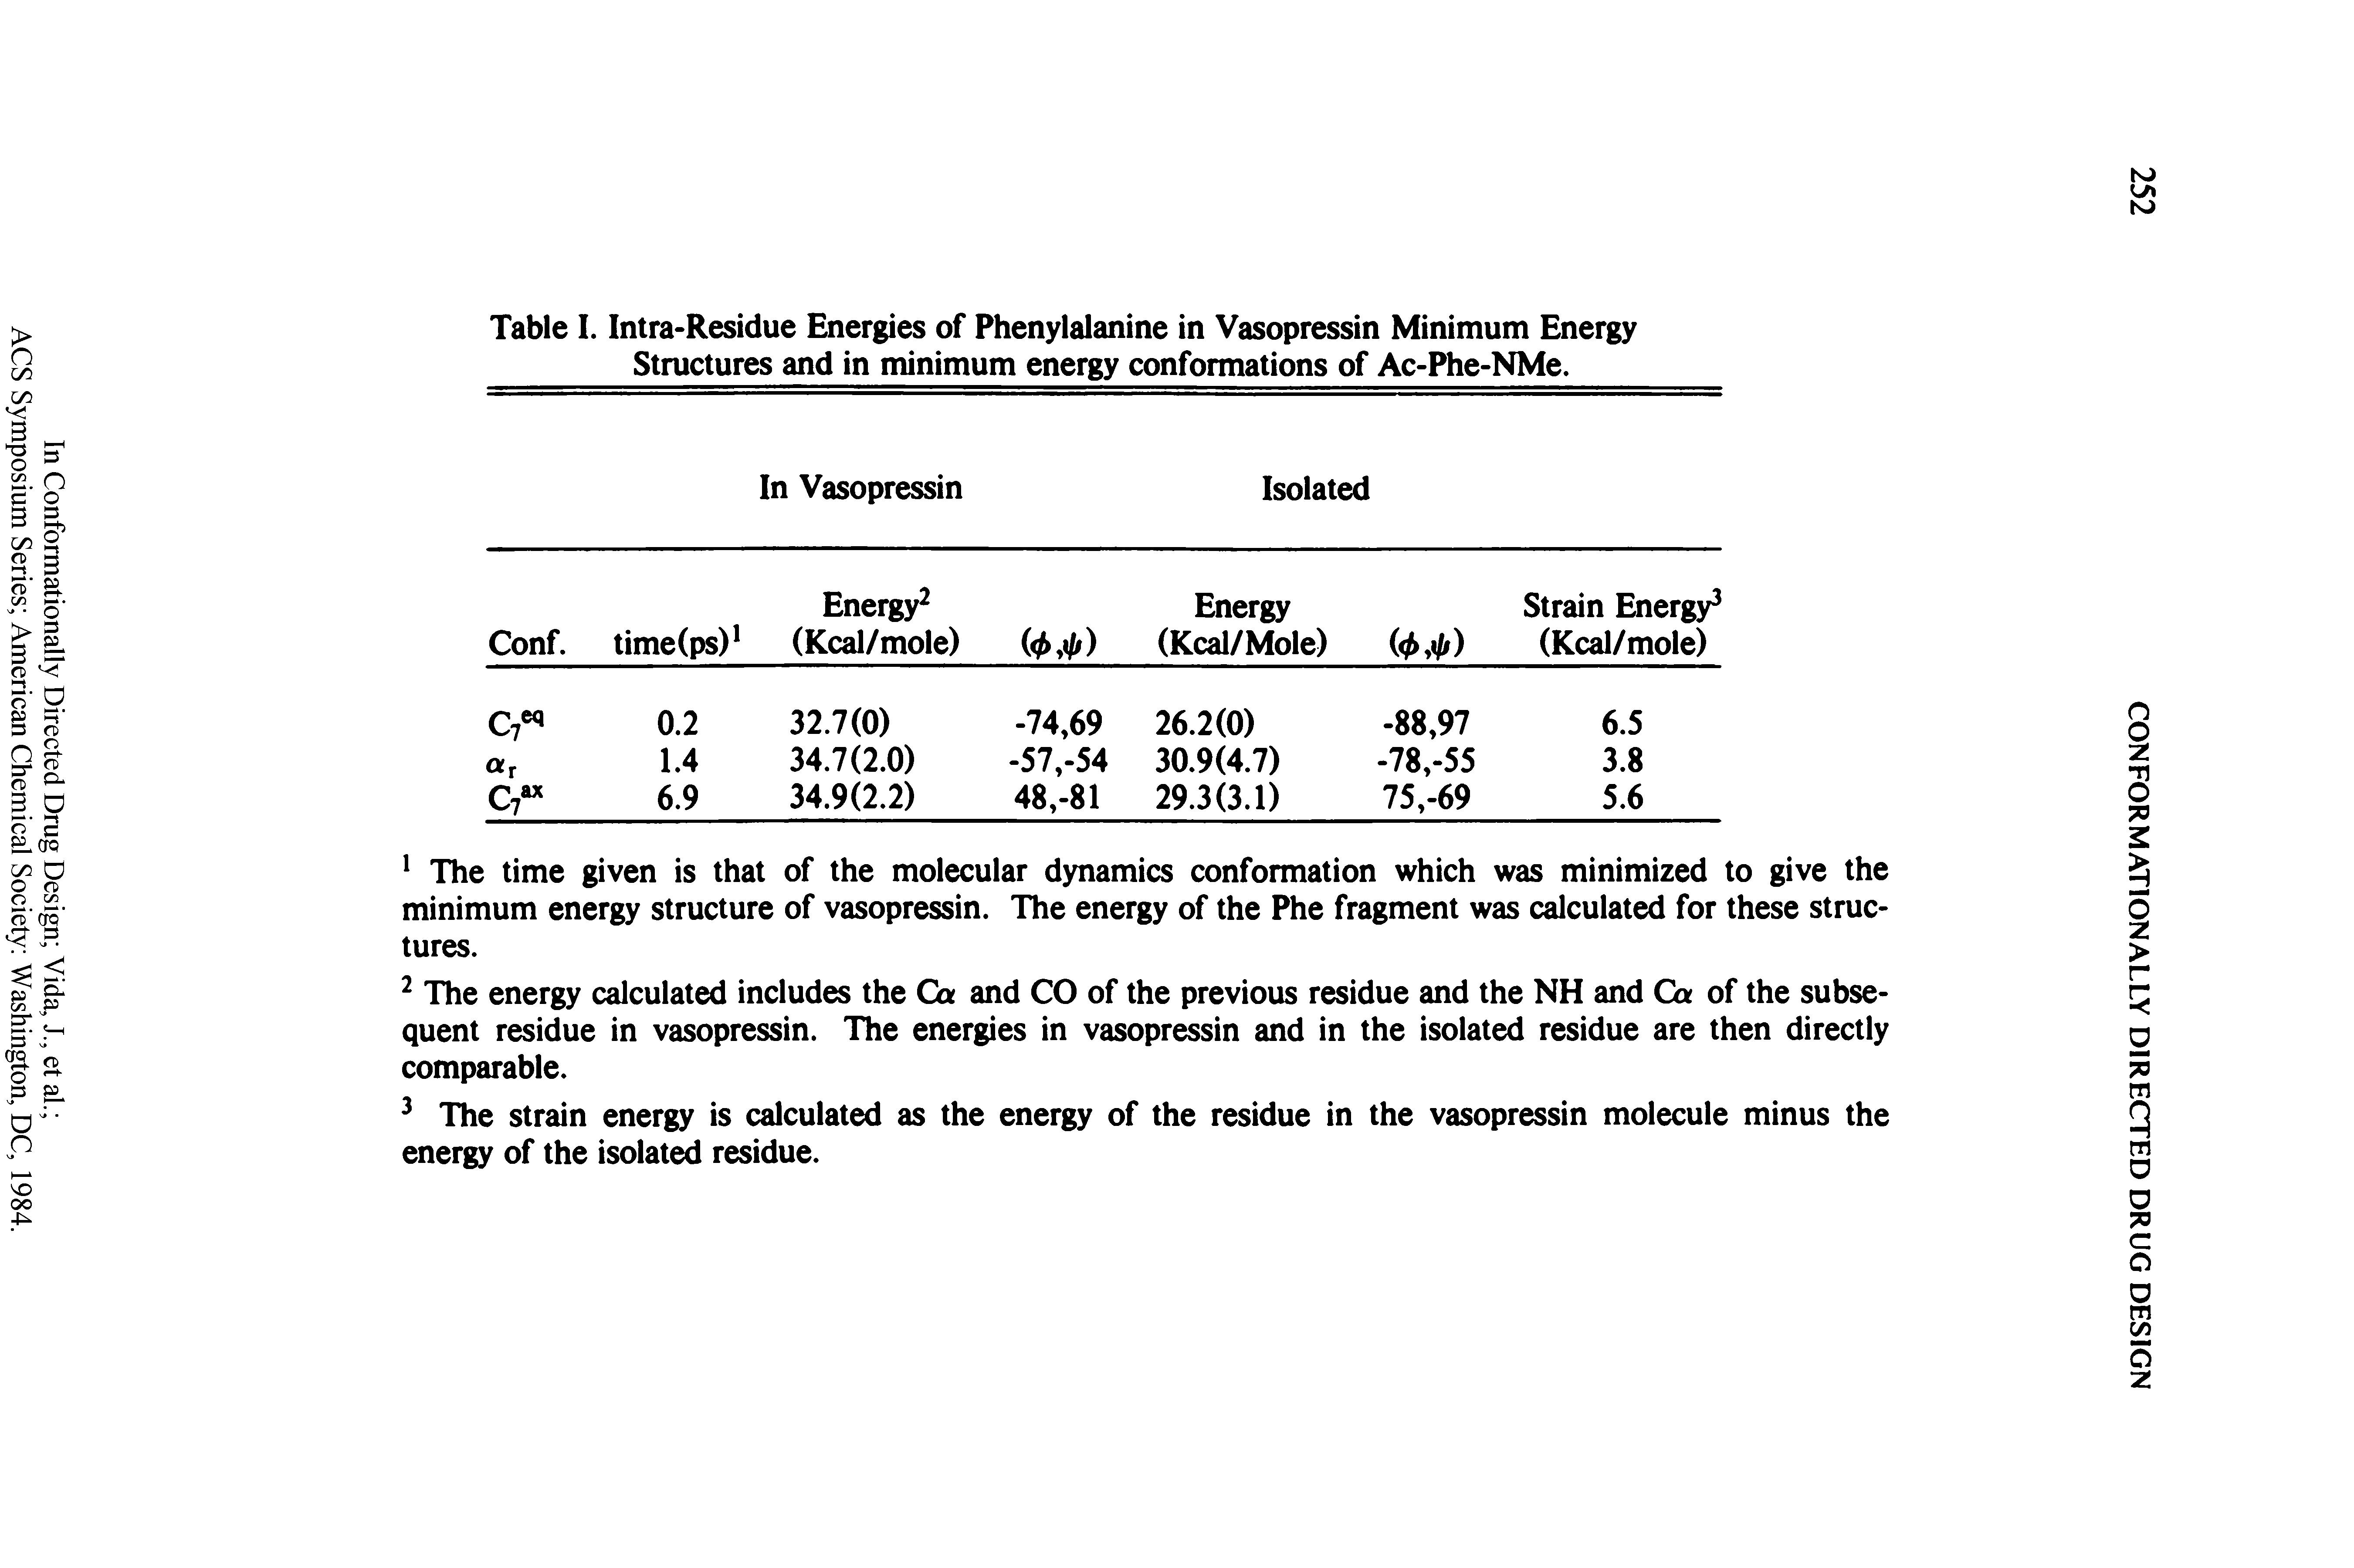 Table I. Intra-Residue Energies of Phenylalanine in Vasopressin Minimum Energy Structures and in minimum energy conformations of Ac-Phe-NMe.